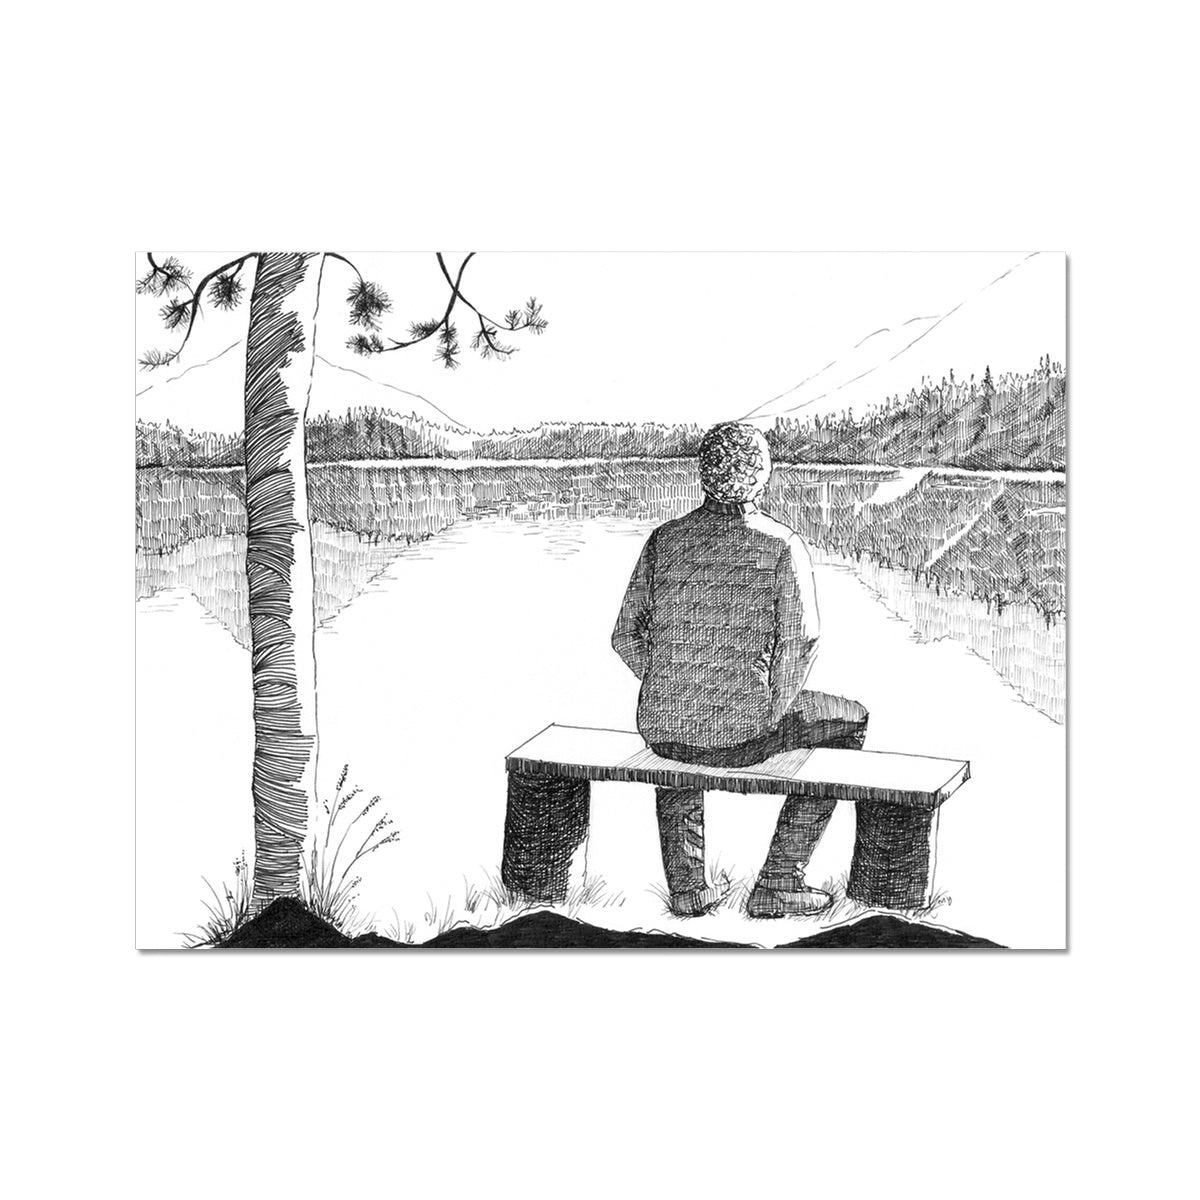 Image: line drawing landscape scenery of lake and mountain with a man seated on a bench